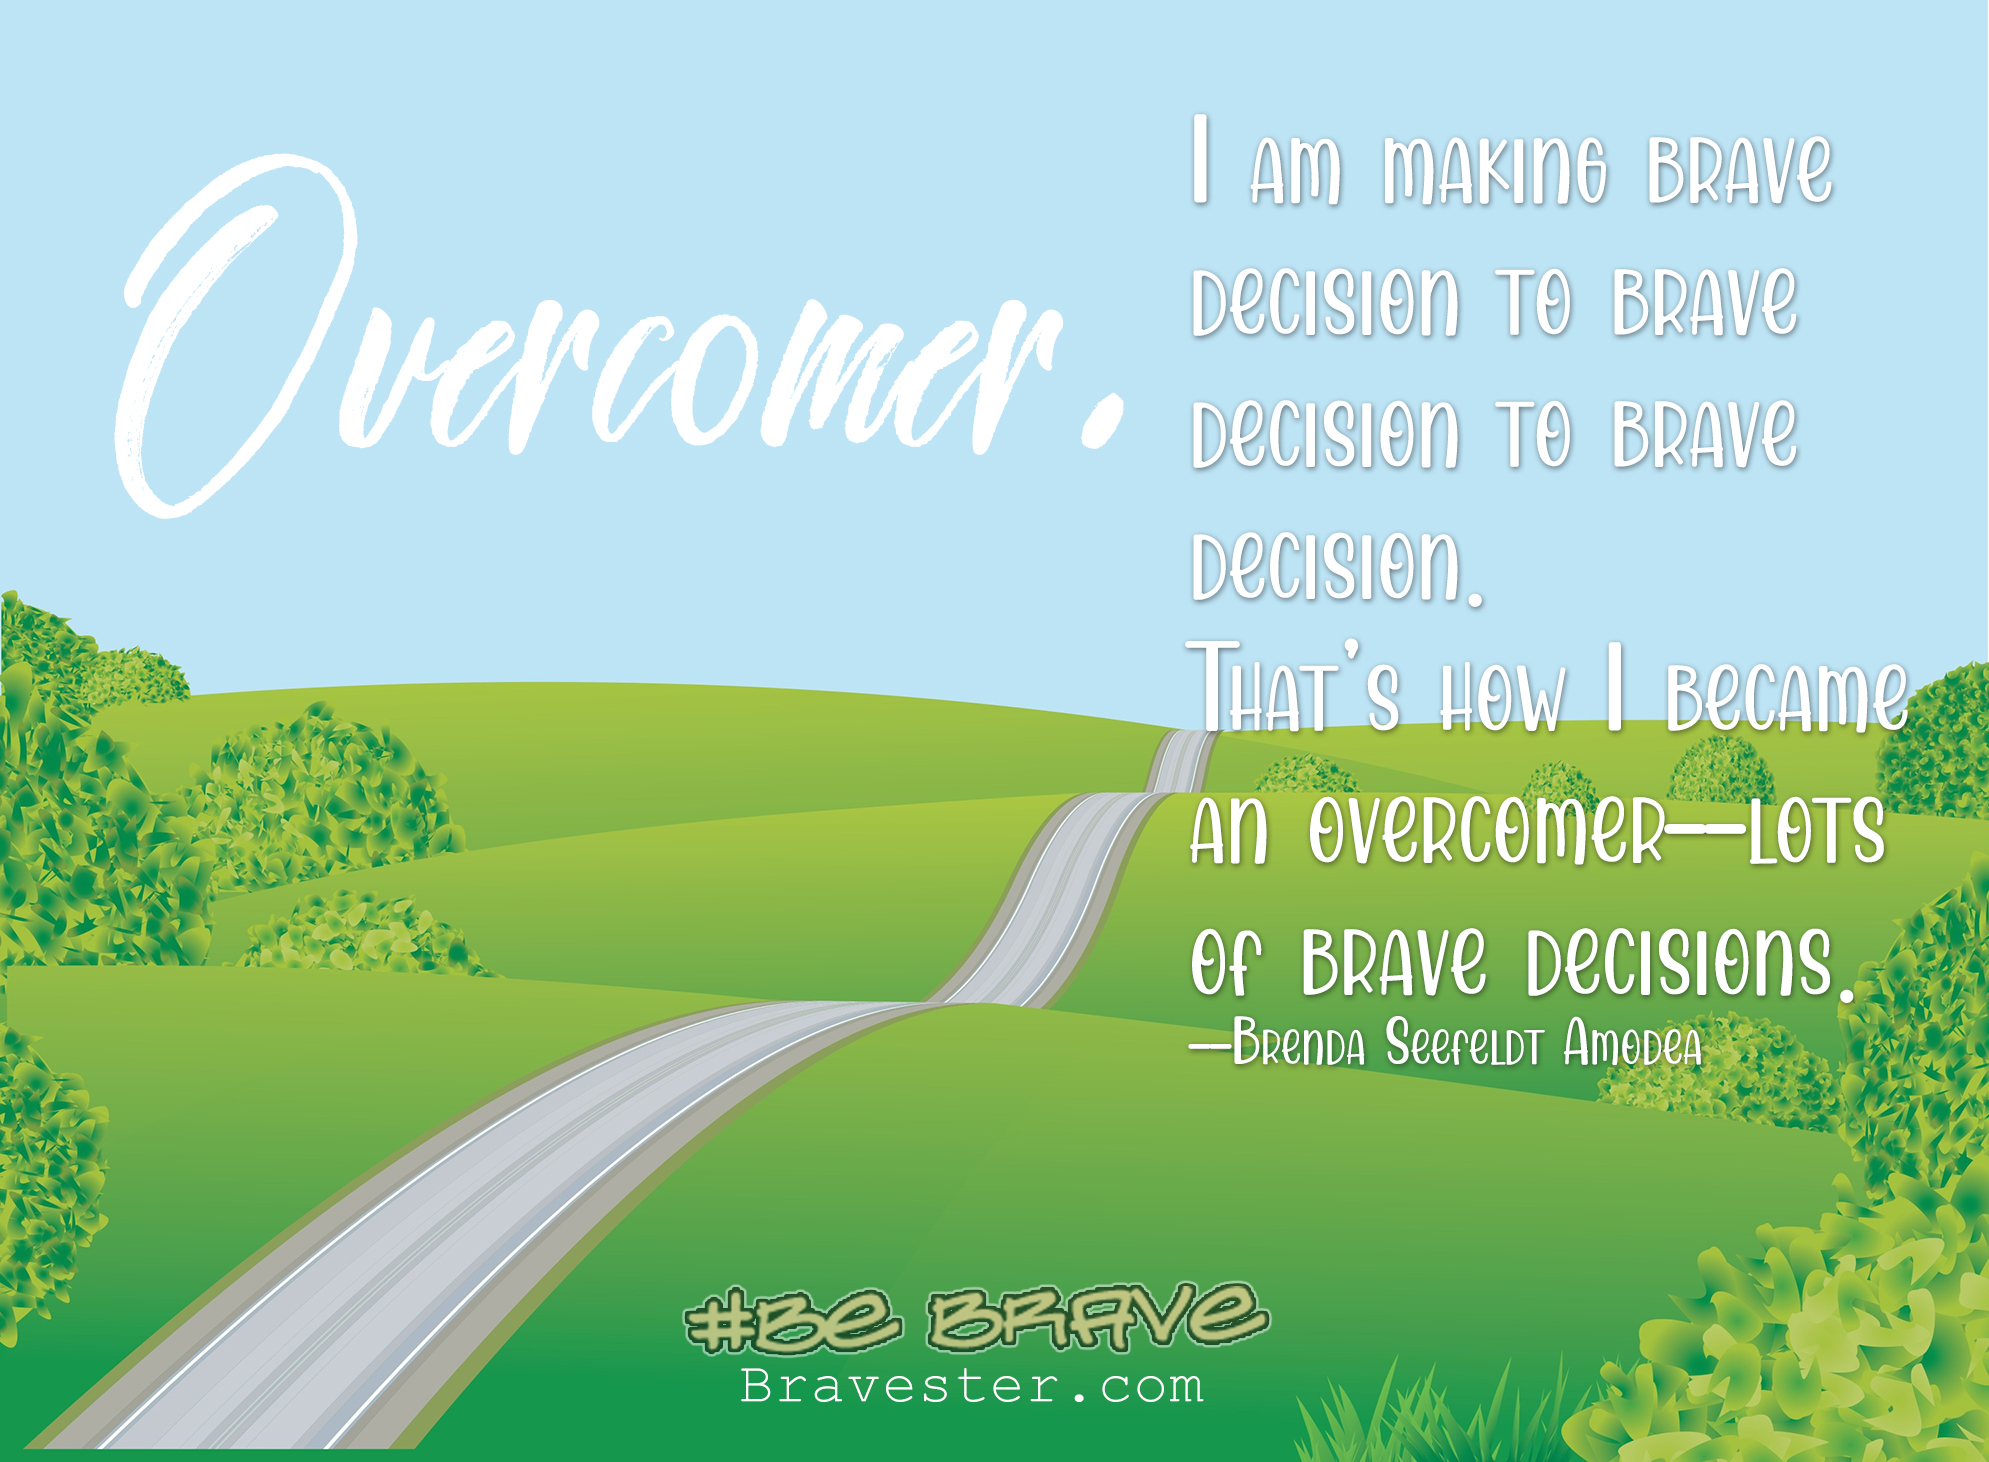 Brave Decision to Brave Decision Doesn't Always Mean the Right